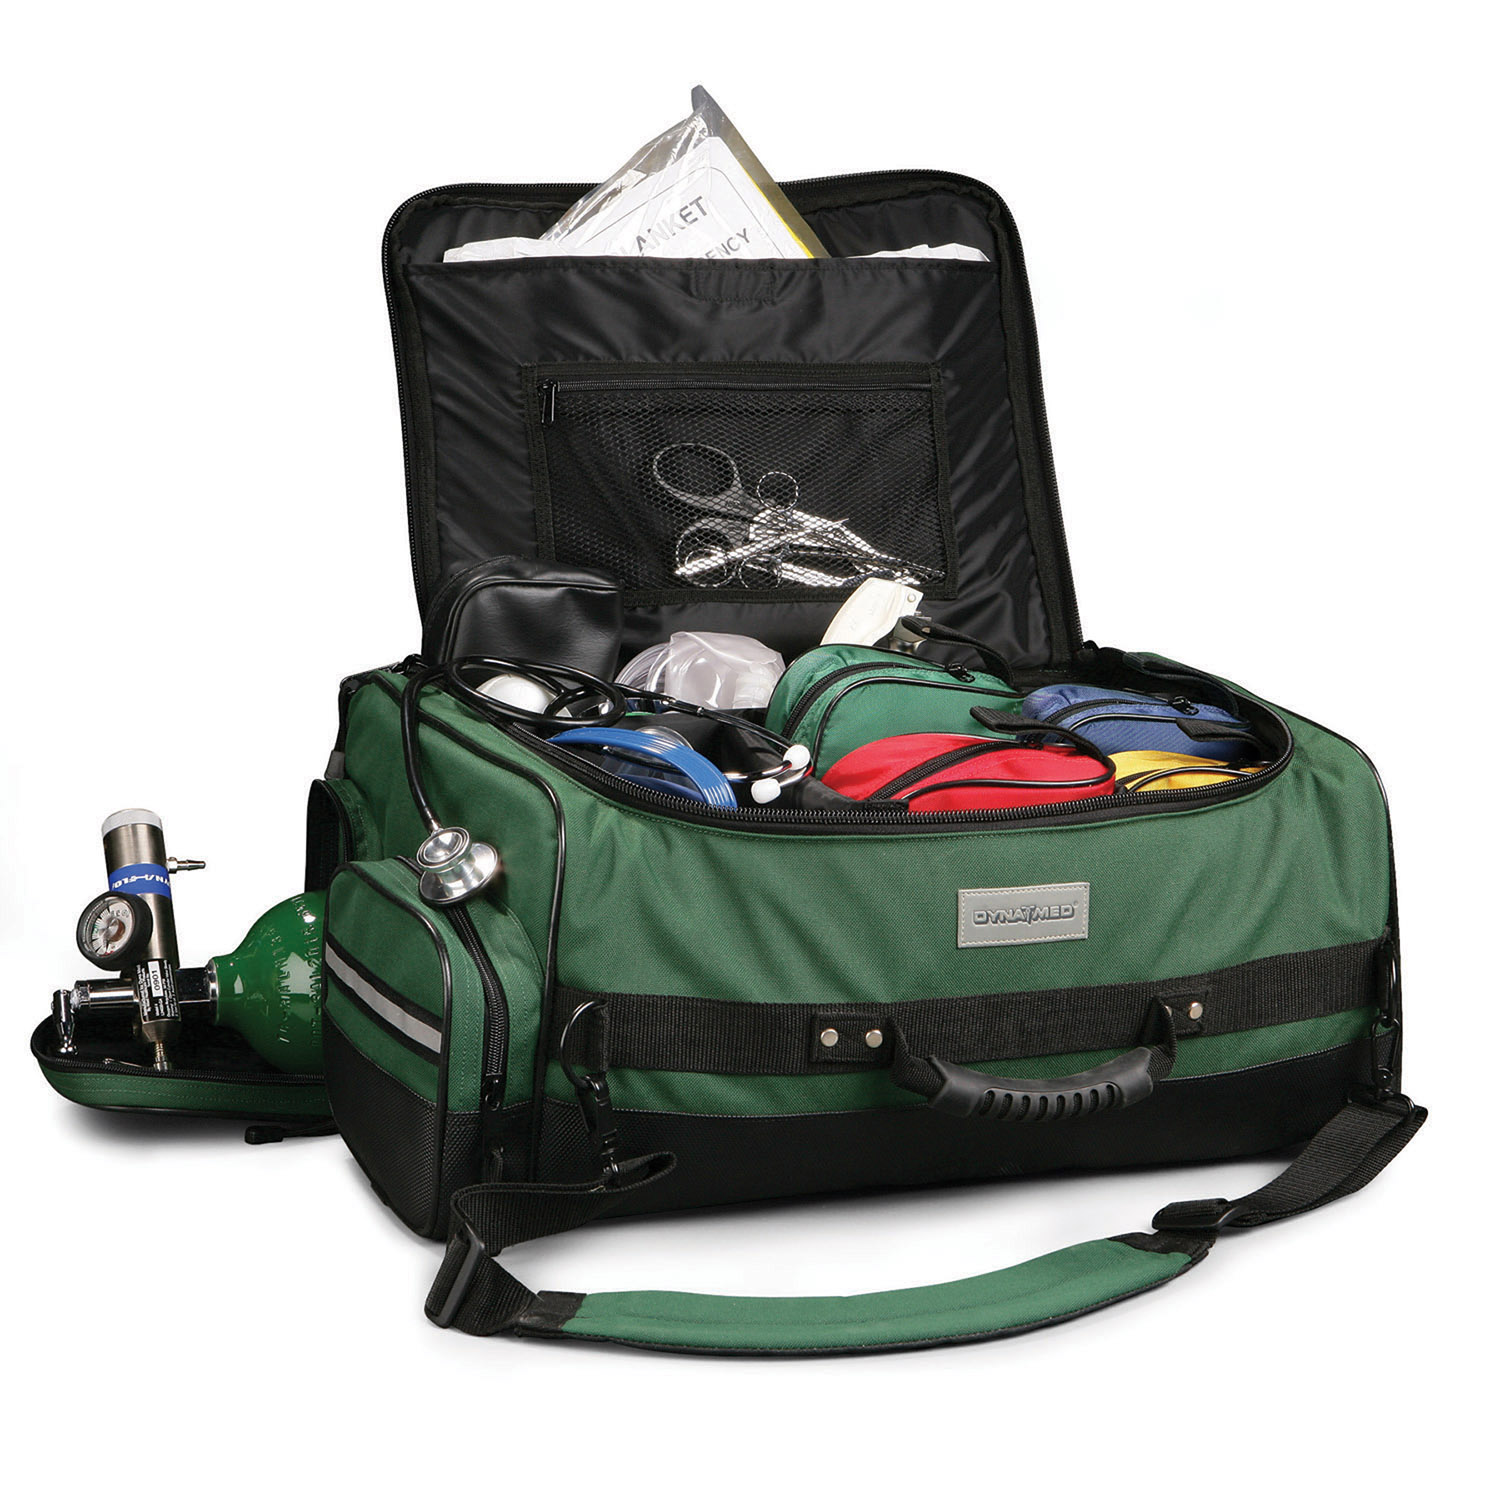 Dyna Med Trauma O2 Access ALS Complete Kit